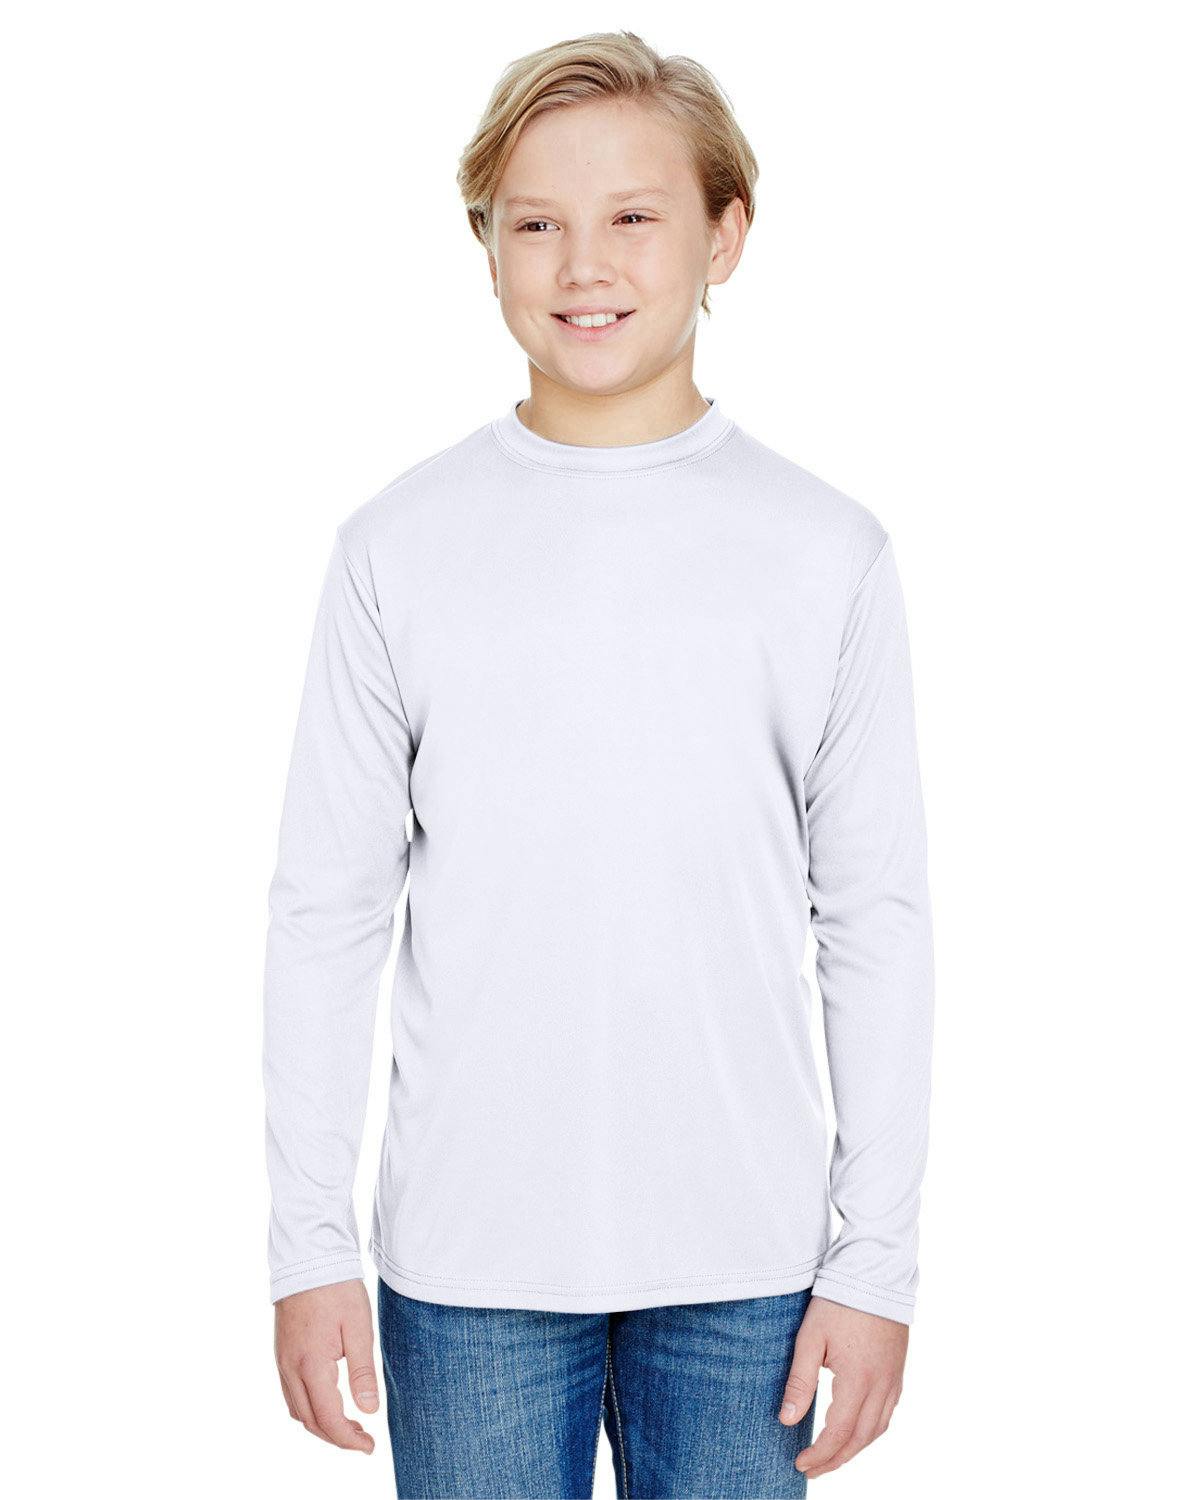 Image for Youth Long Sleeve Cooling Performance Crew Shirt